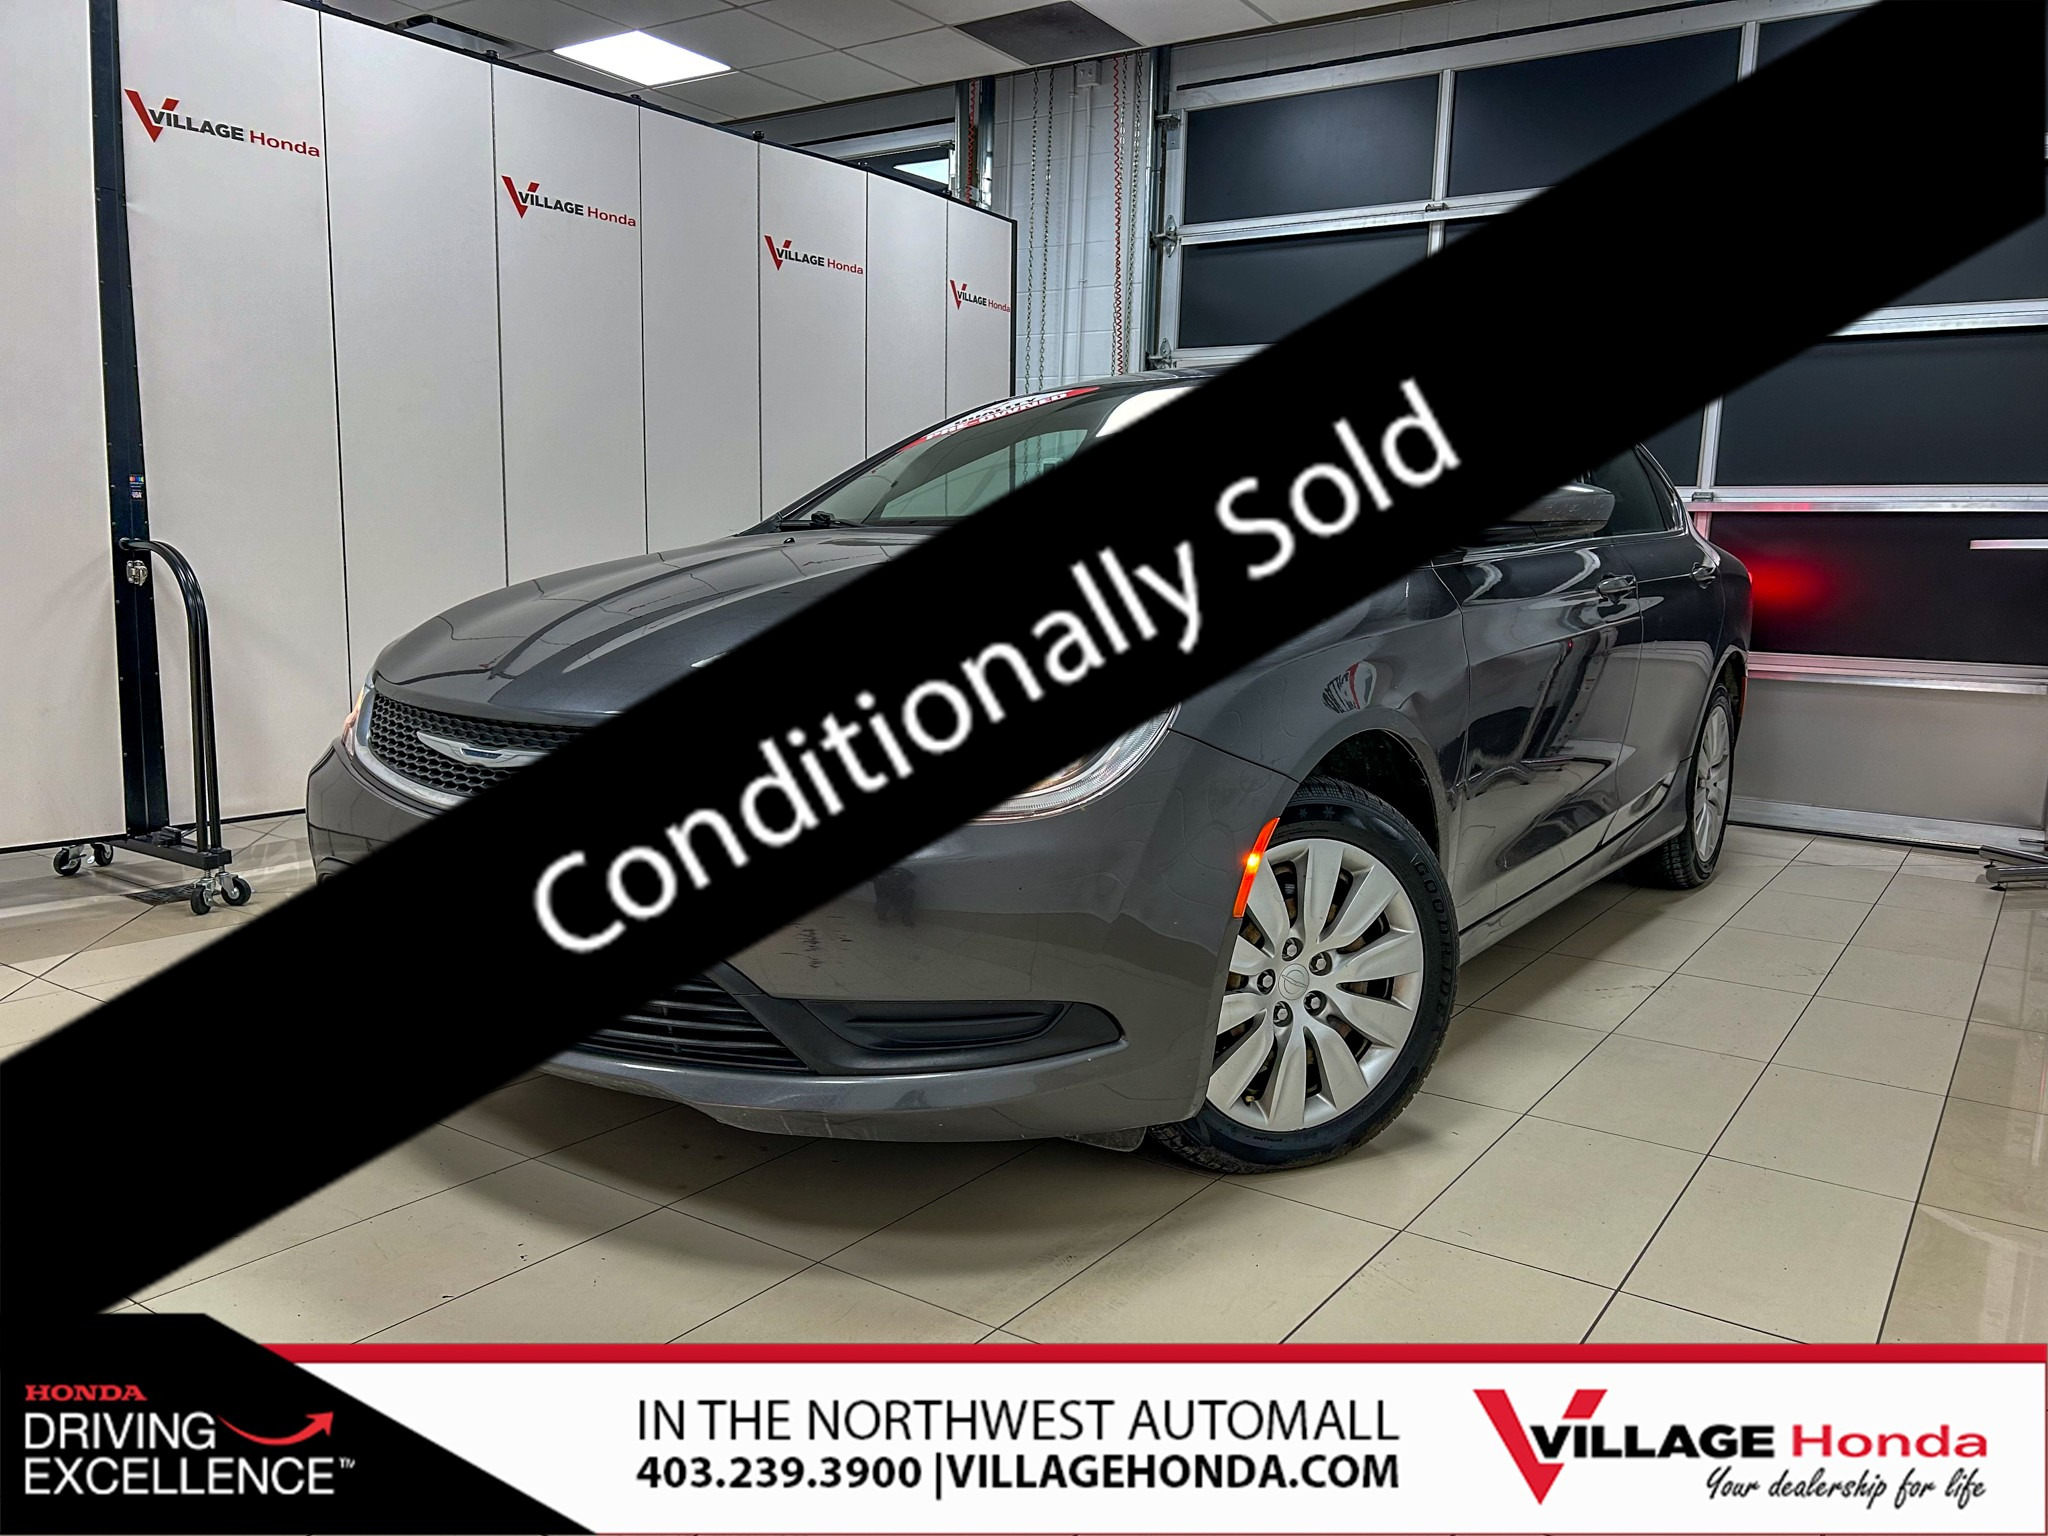 2015 Chrysler 200 LX LOCAL! BLUETOOTH CONNECTION! HEATED FRONT SEATS